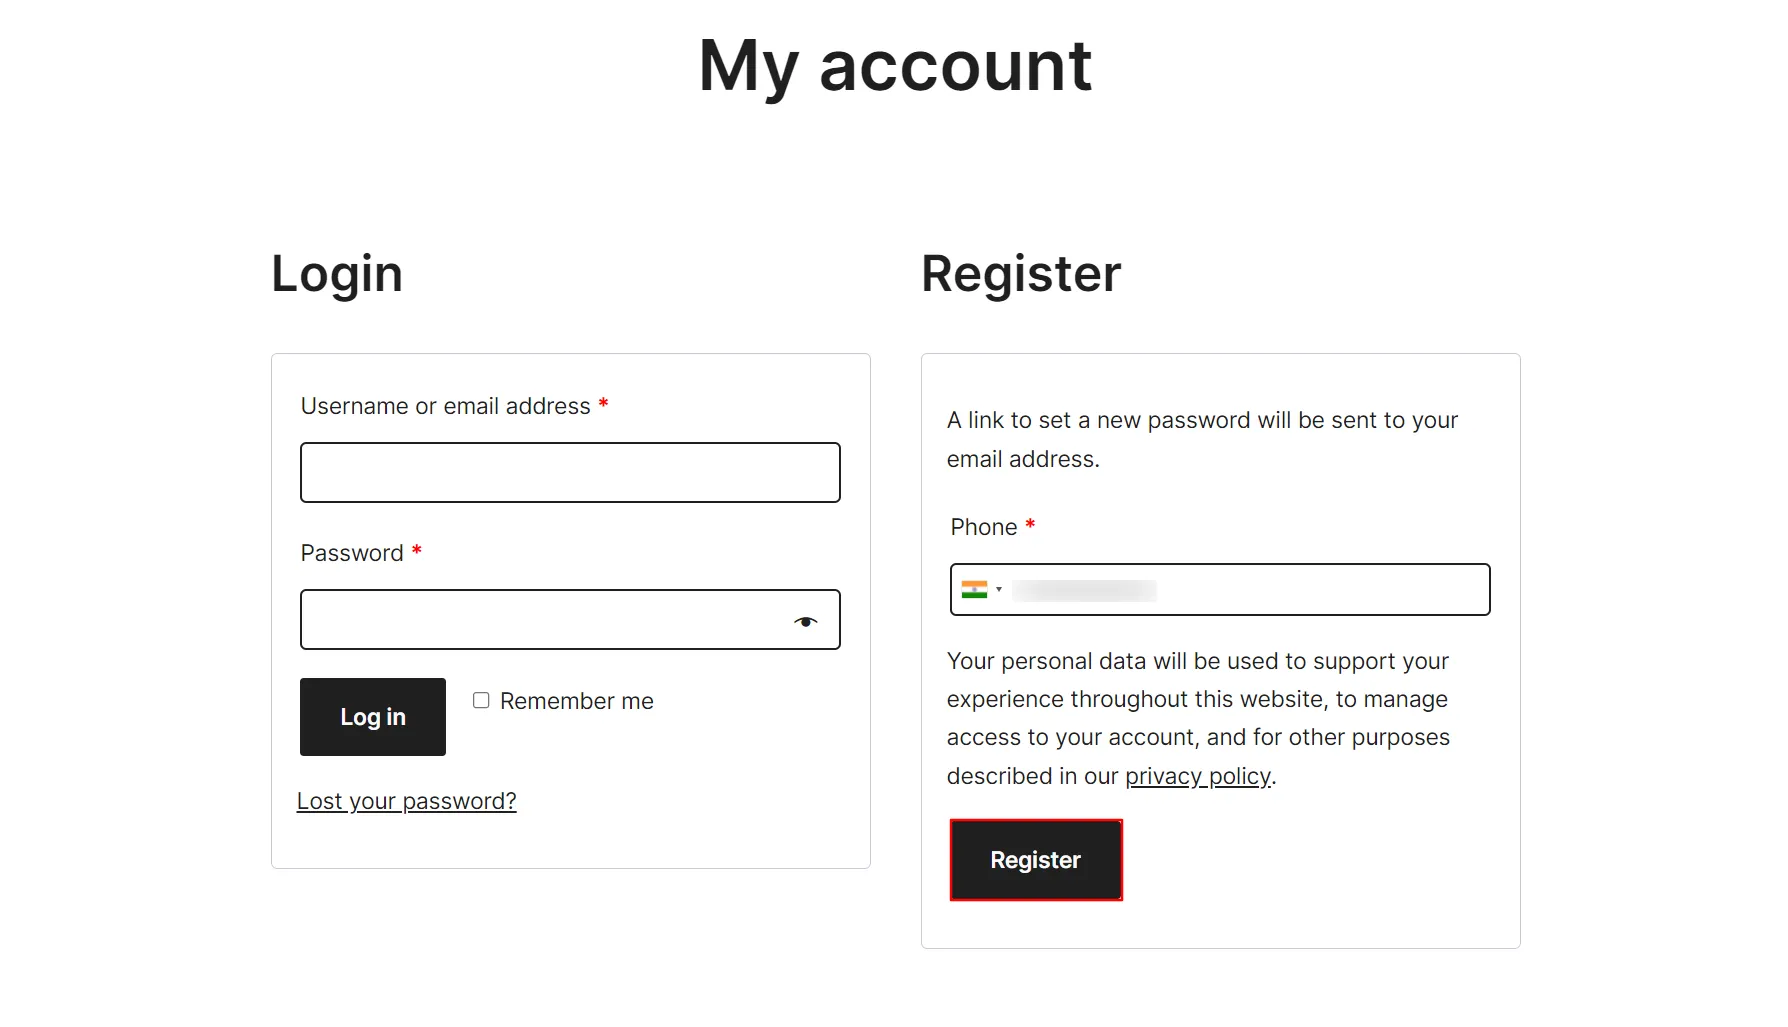 Register with Phone number - click Register button